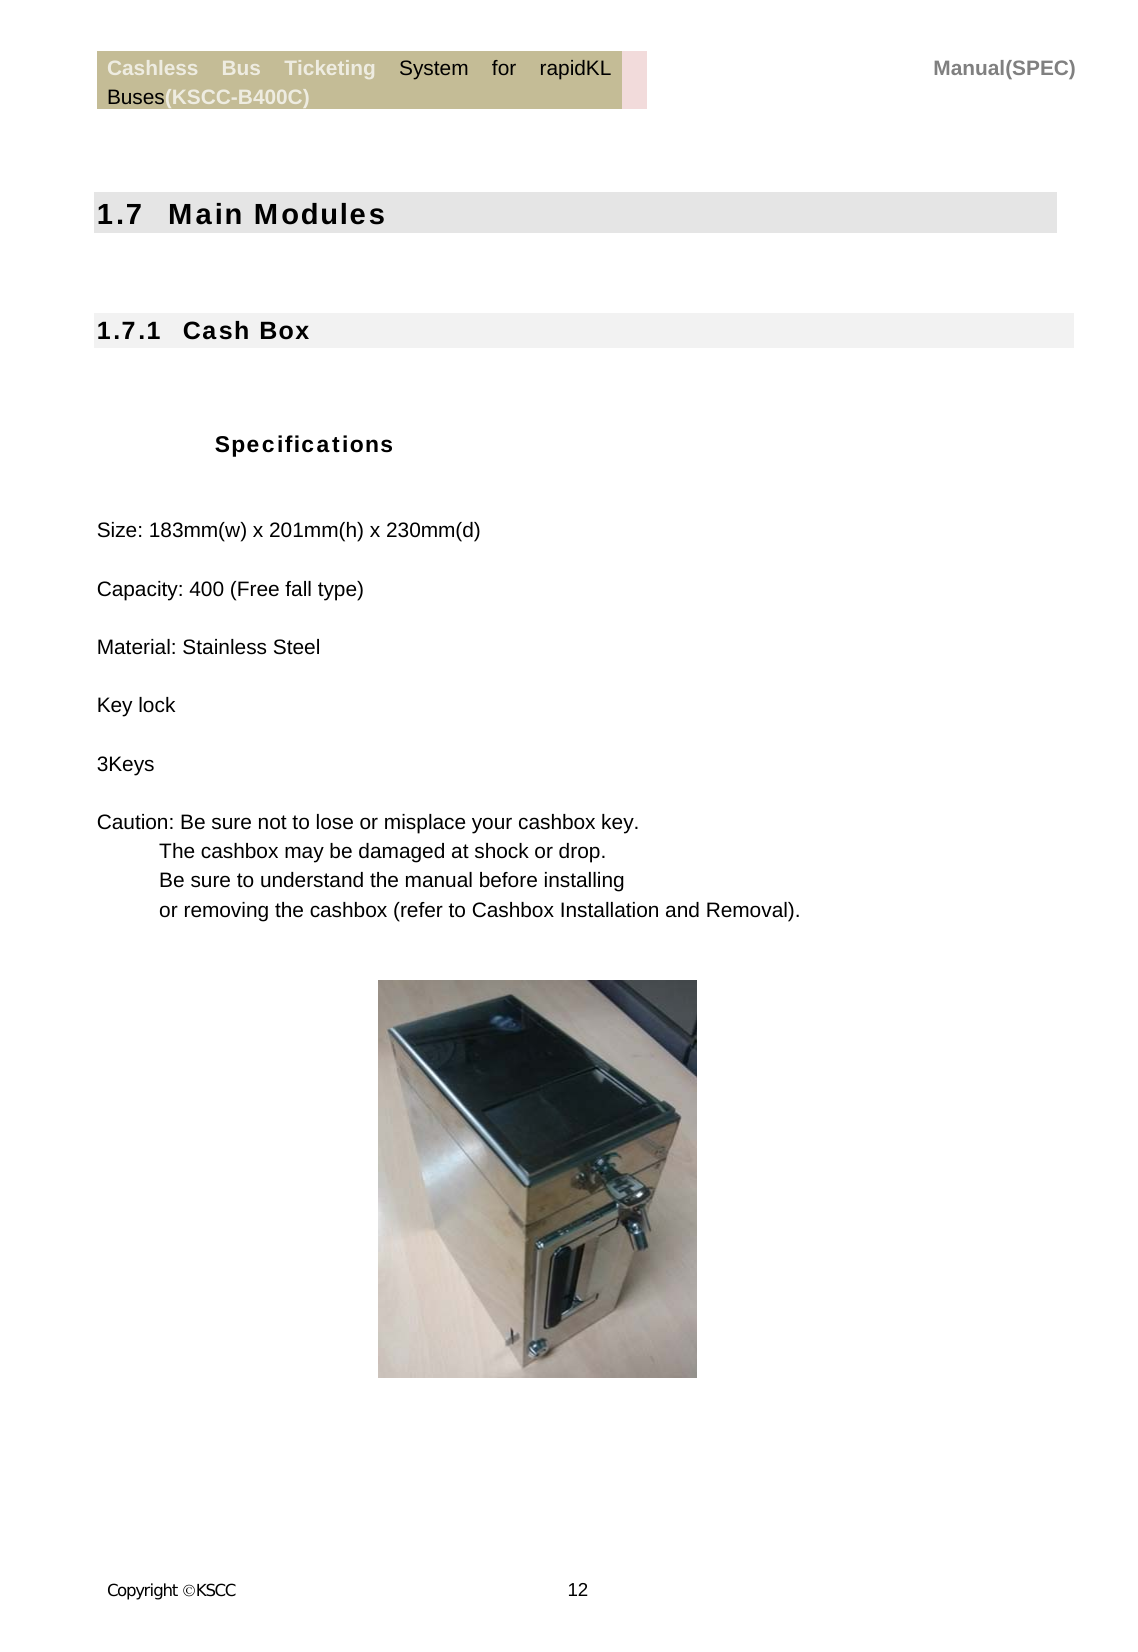 Cashless Bus Ticketing System for rapidKL Buses(KSCC-B400C)  Manual(SPEC) Copyright KSCC 12     1.7   Main Modules  1.7.1   Cash Box  Specifications  Size: 183mm(w) x 201mm(h) x 230mm(d)  Capacity: 400 (Free fall type)  Material: Stainless Steel  Key lock  3Keys  Caution: Be sure not to lose or misplace your cashbox key. The cashbox may be damaged at shock or drop. Be sure to understand the manual before installing   or removing the cashbox (refer to Cashbox Installation and Removal).      